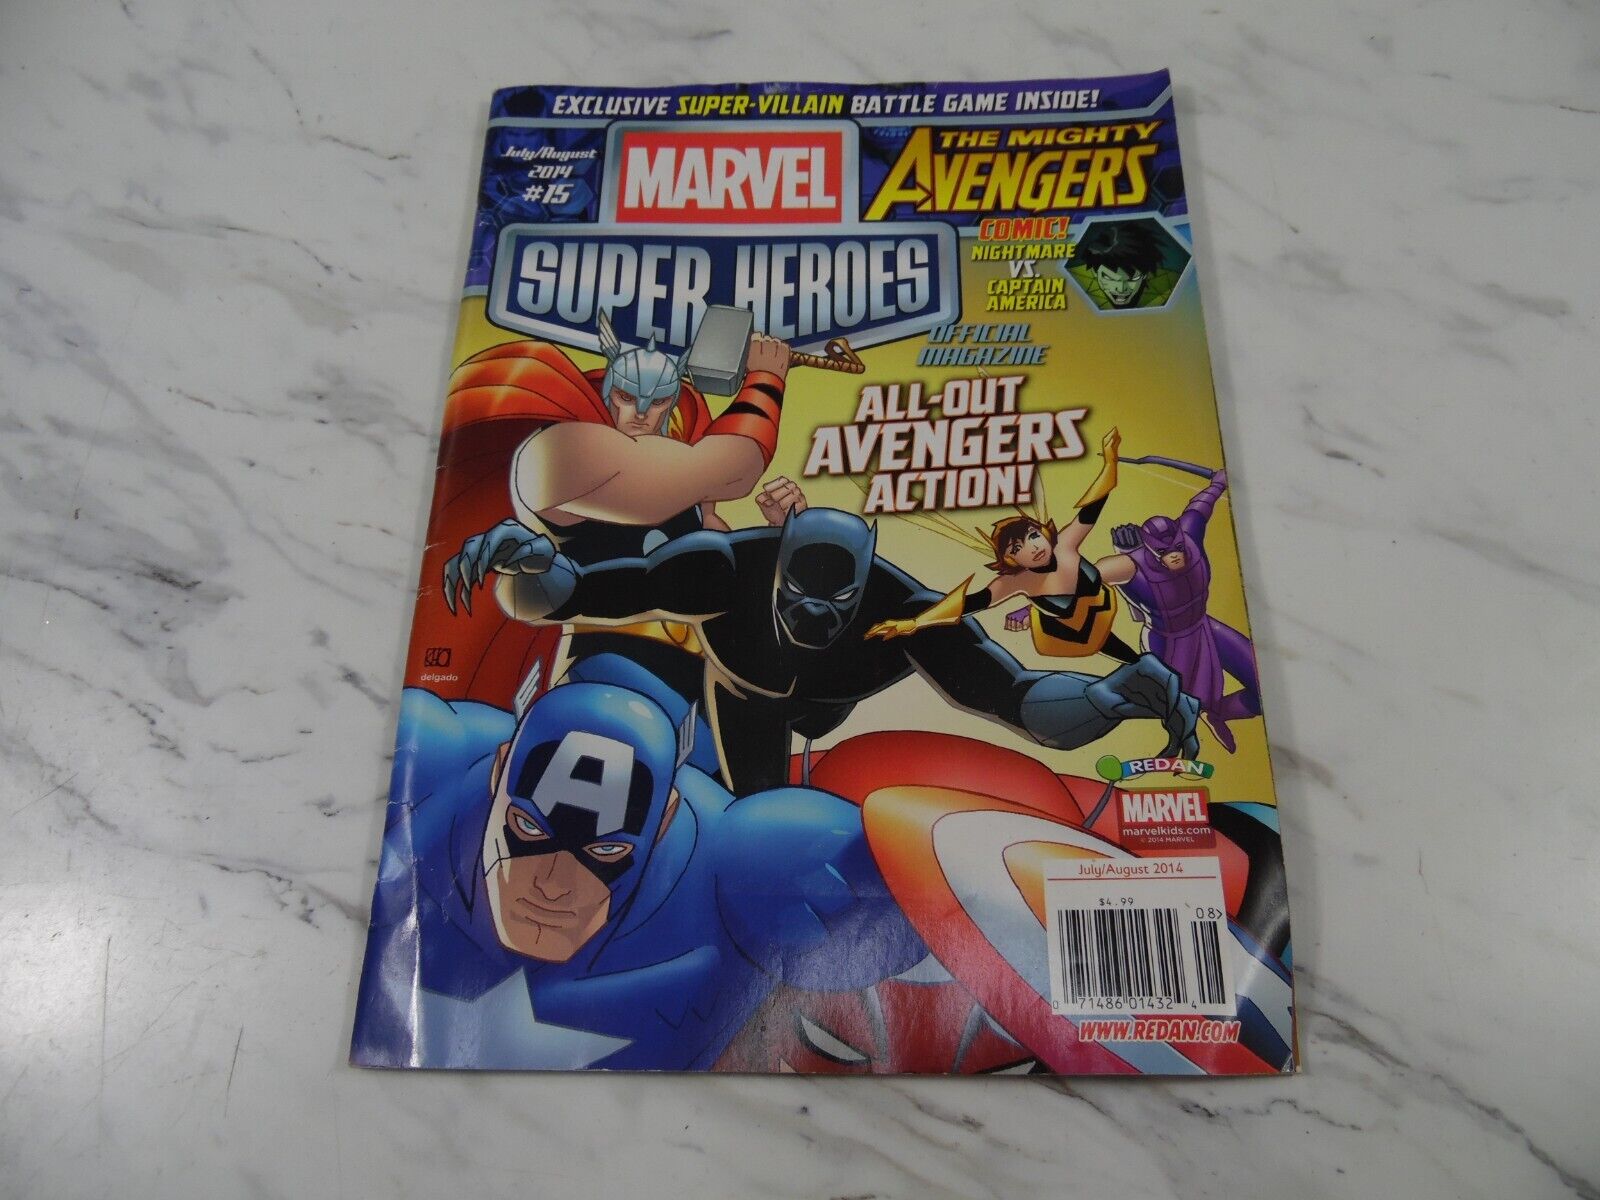 🎆Marvel Kid’s Comic book The Mighty Avengers #15 July/Aug 2014 Magazine🎆